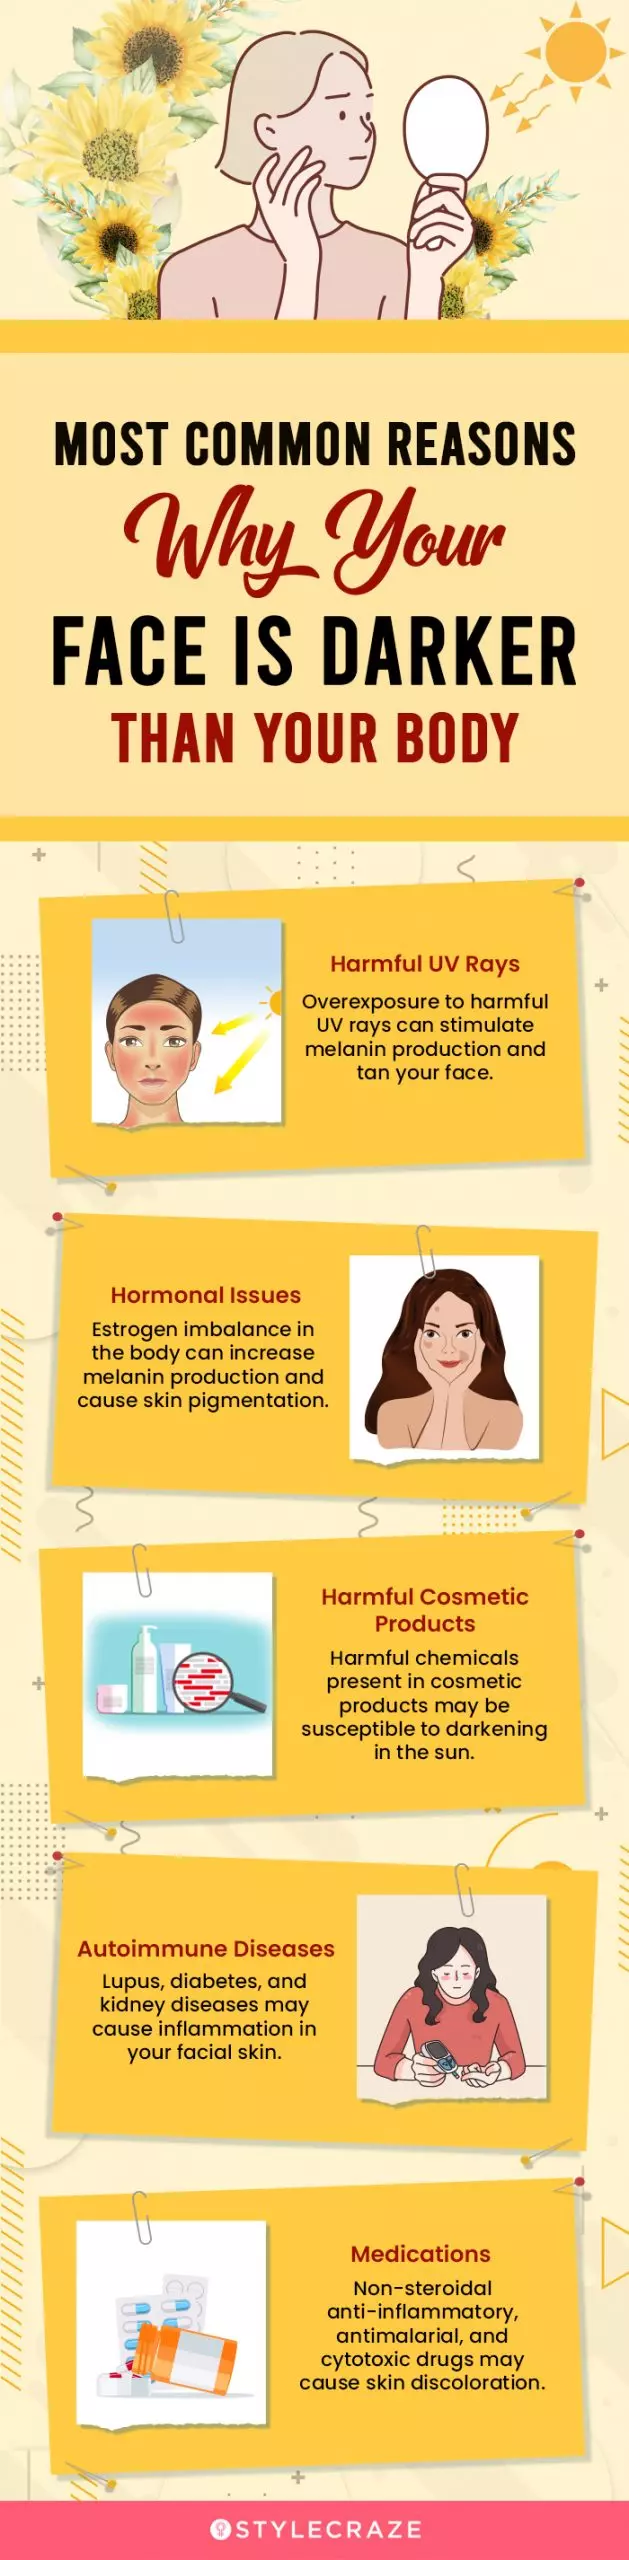 most common reasons why your face is darker than your body (infographic)